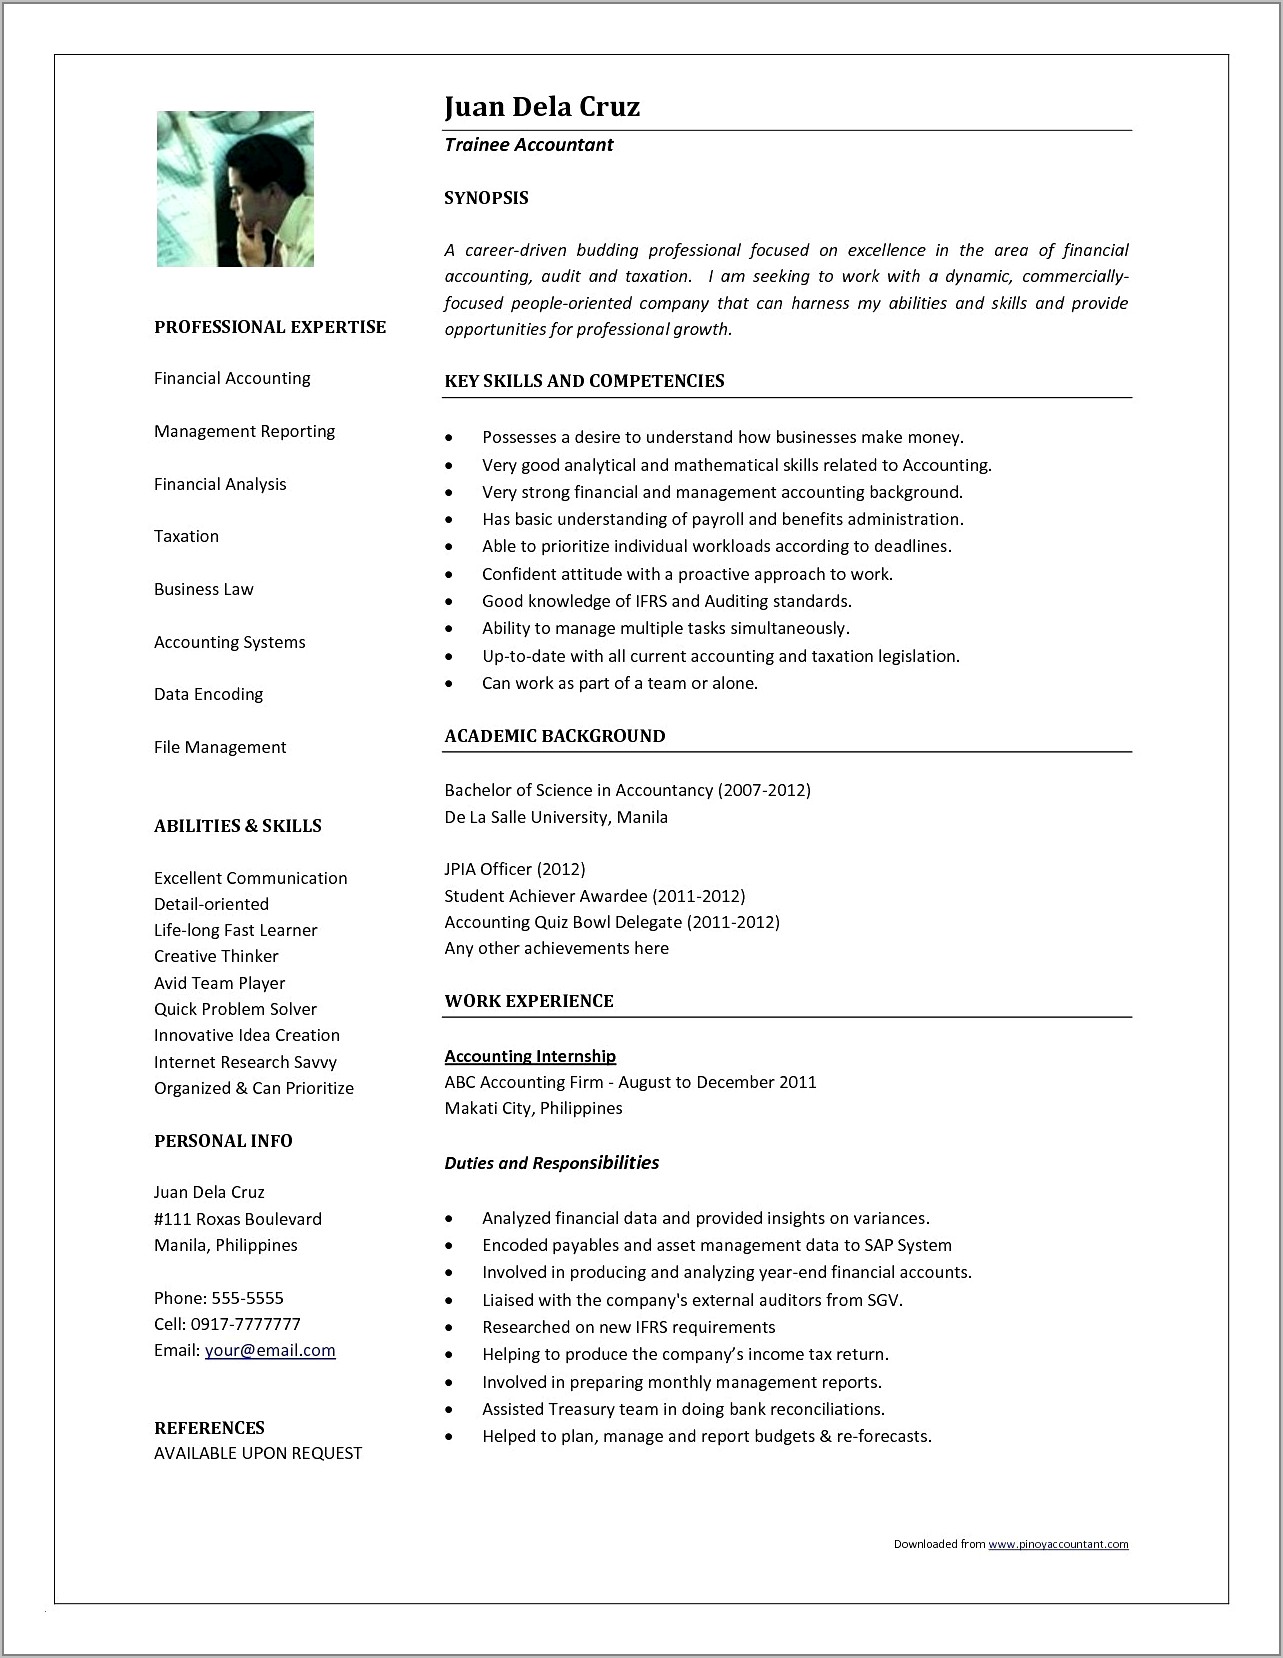 Resume Samples For Accounting Jobs In India